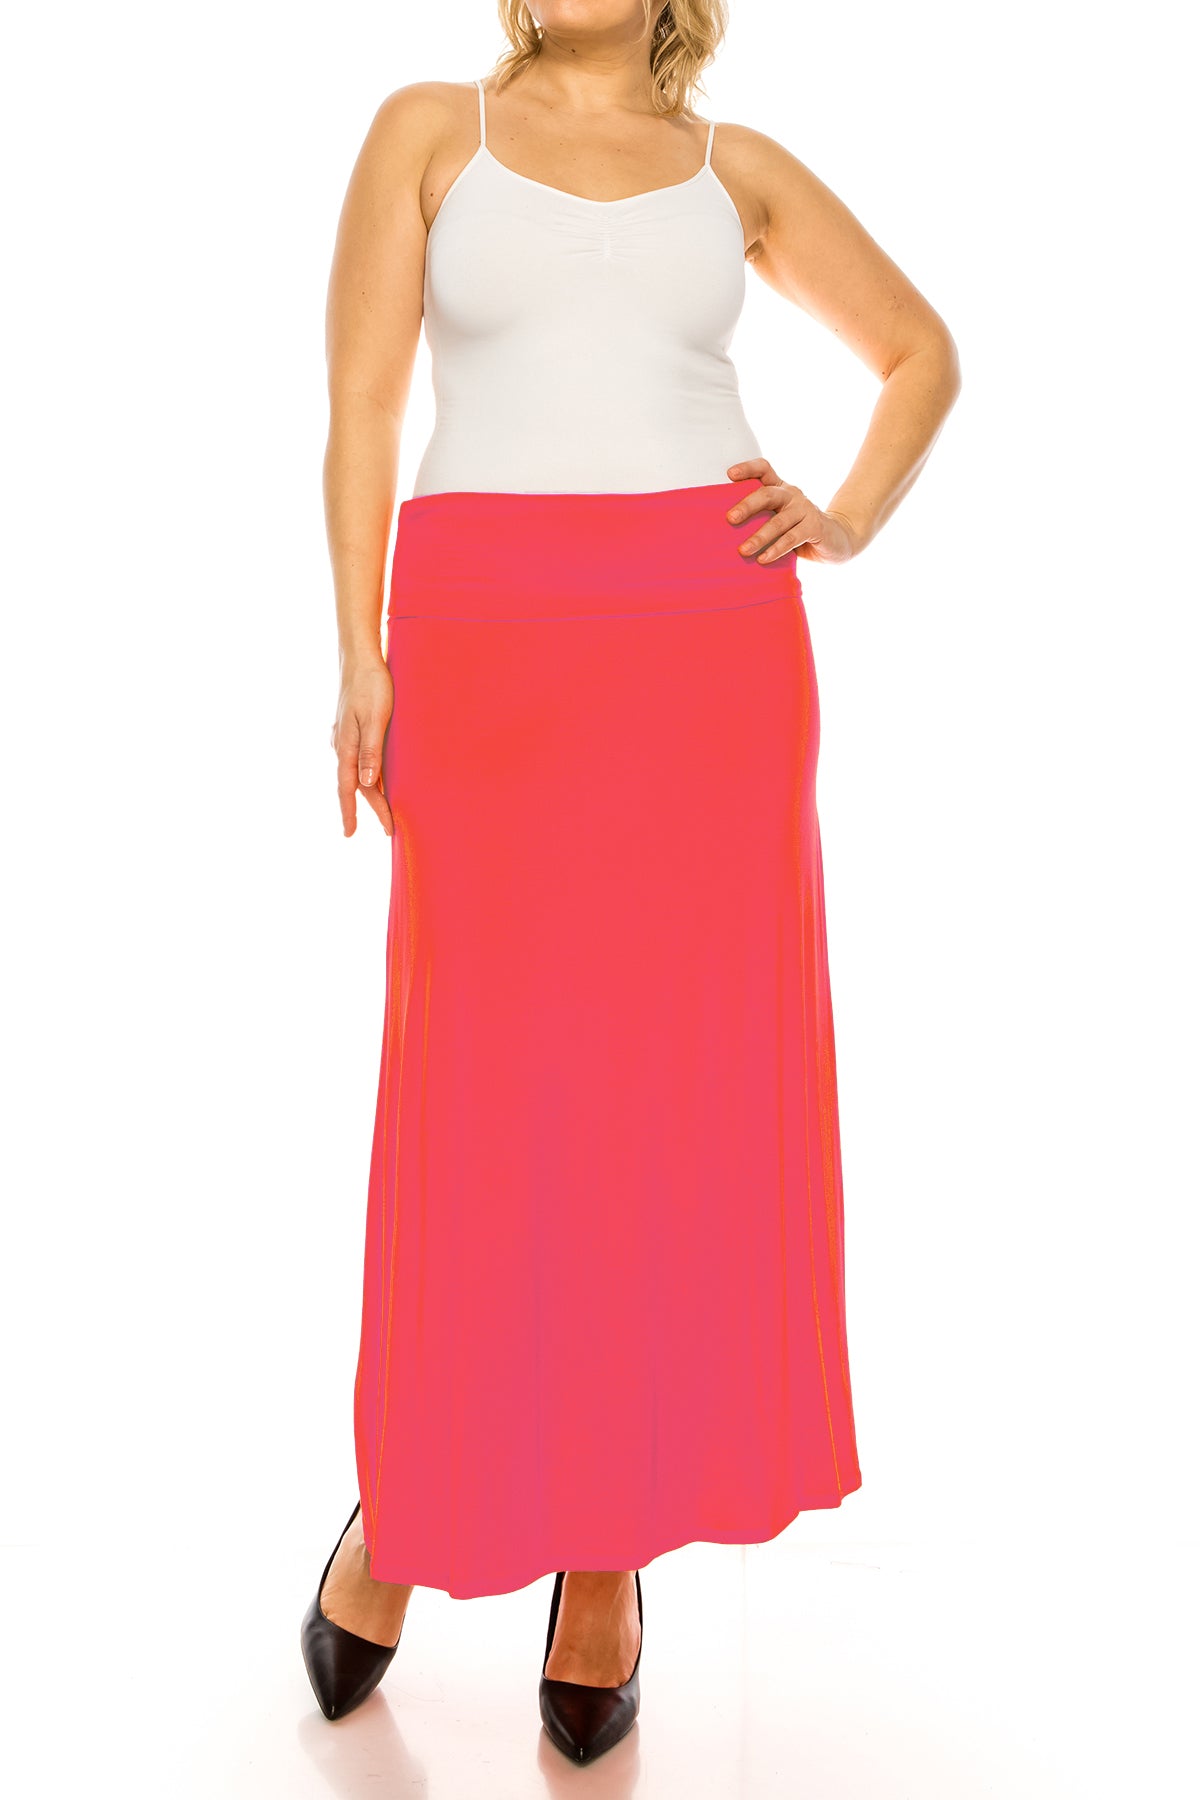 Women's Plus Size Casual Solid High Waisted A -line Maxi Skirt with an elastic Waistband - FashionJOA